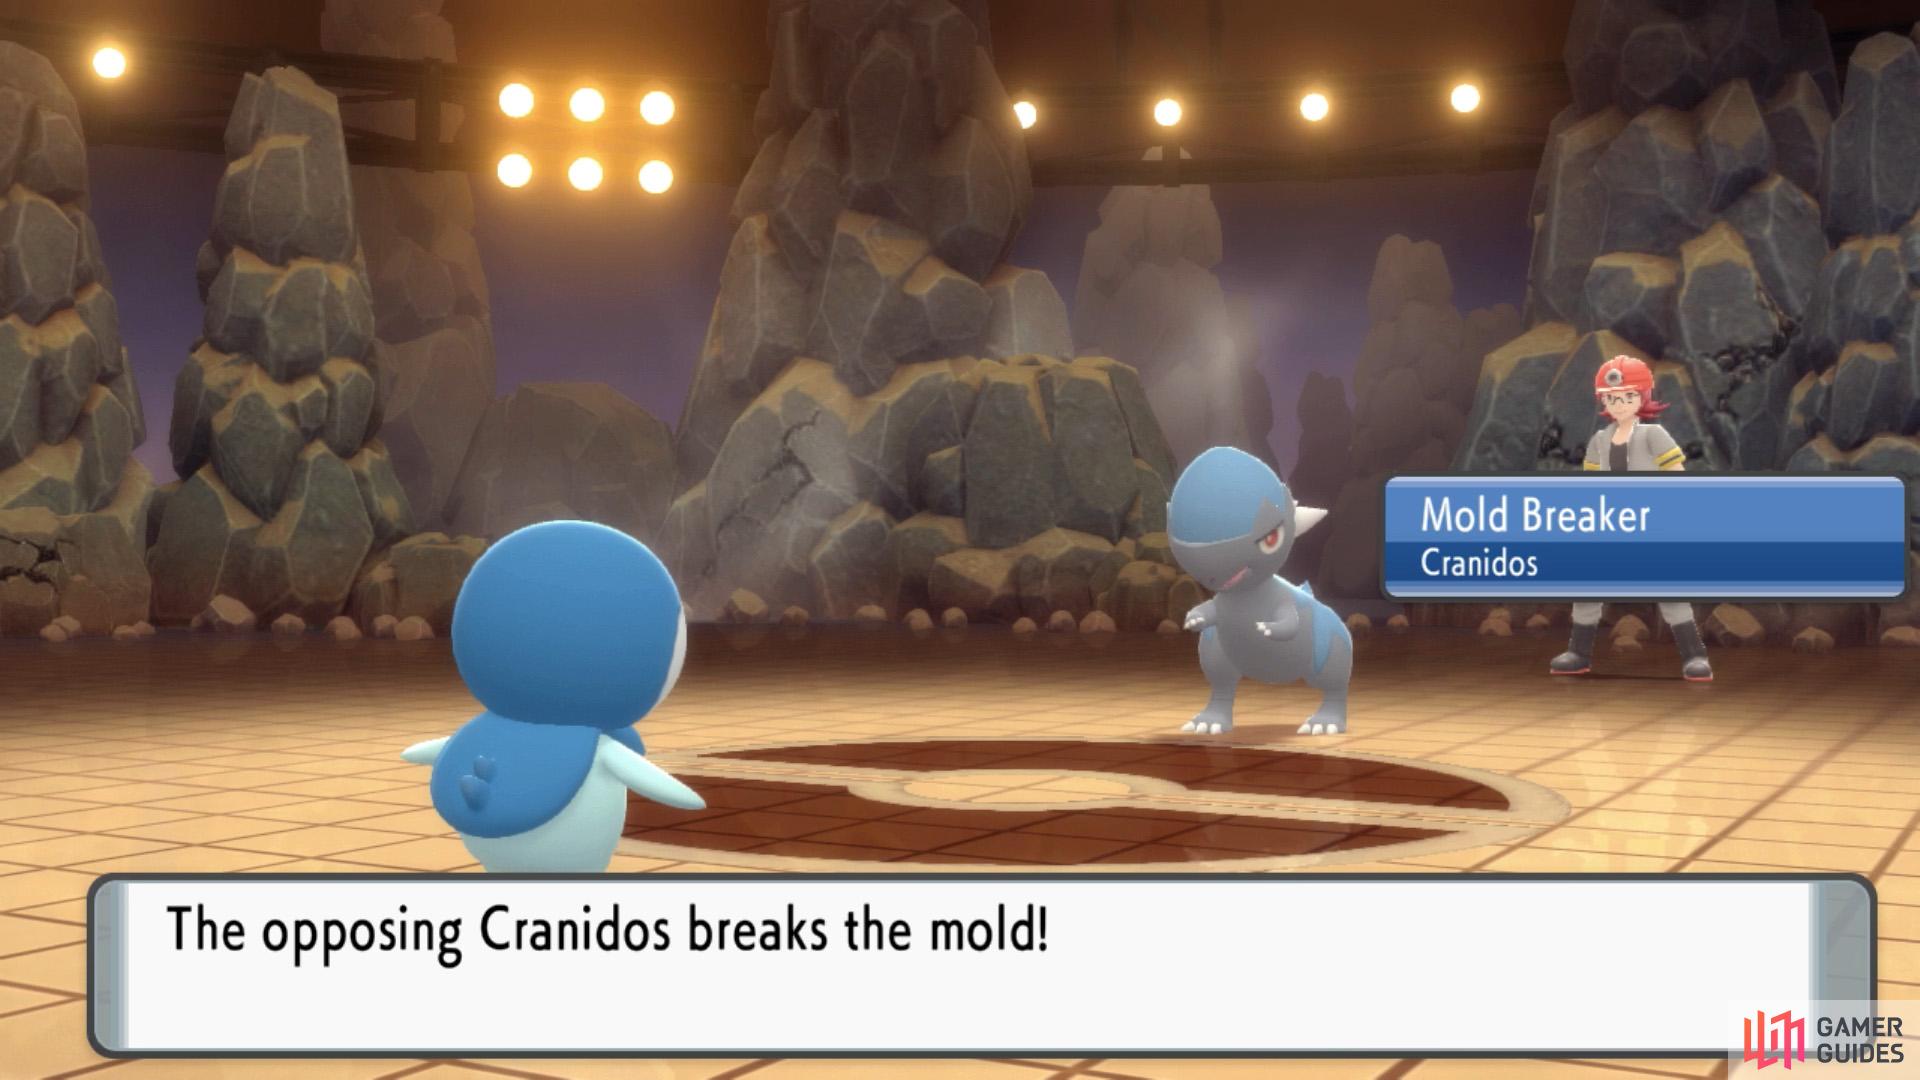 The Mold Breaker ability ignores the opponent's abilities when attacking.